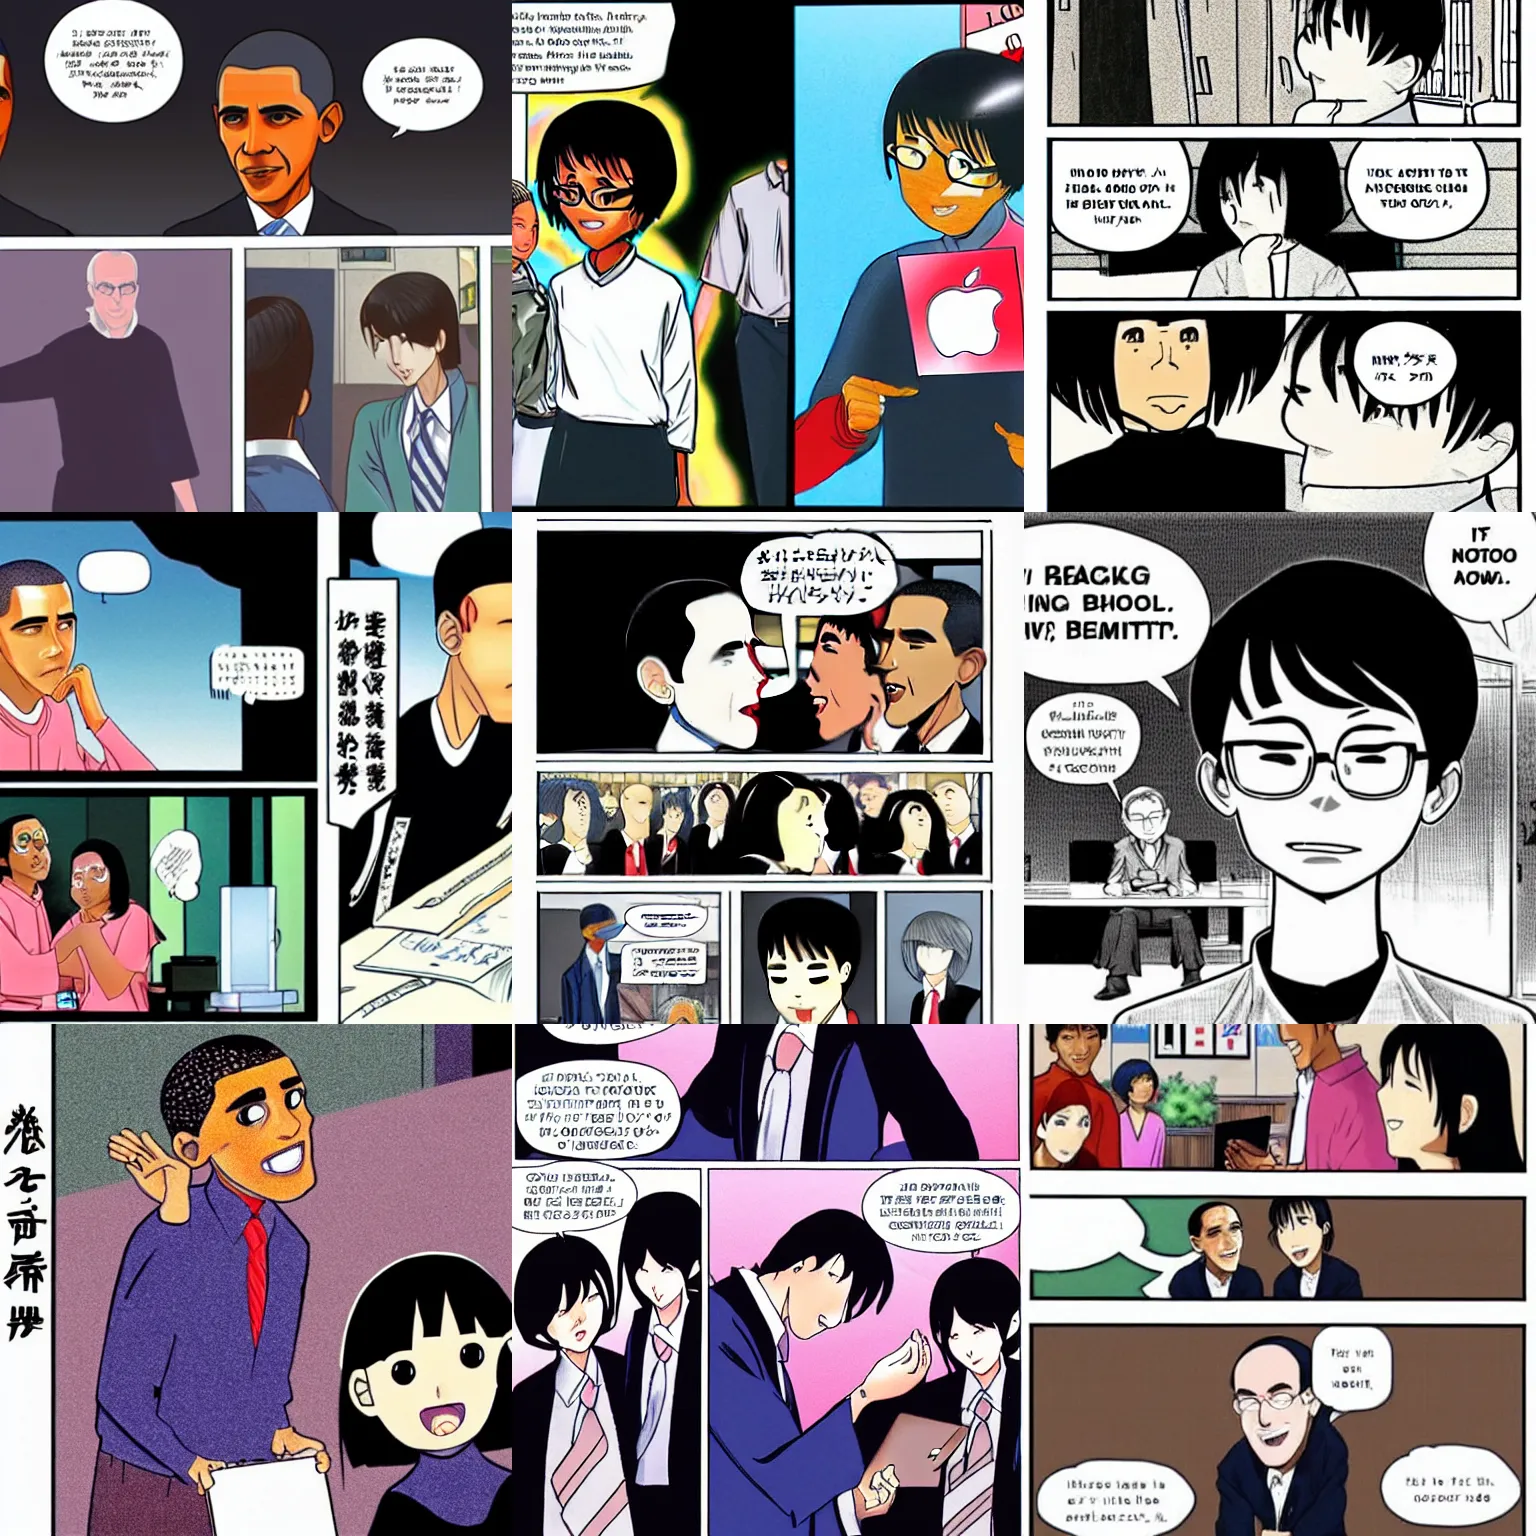 Prompt: manga of barack obama breaking up with steve jobs in an all - girl highschool in kyoto